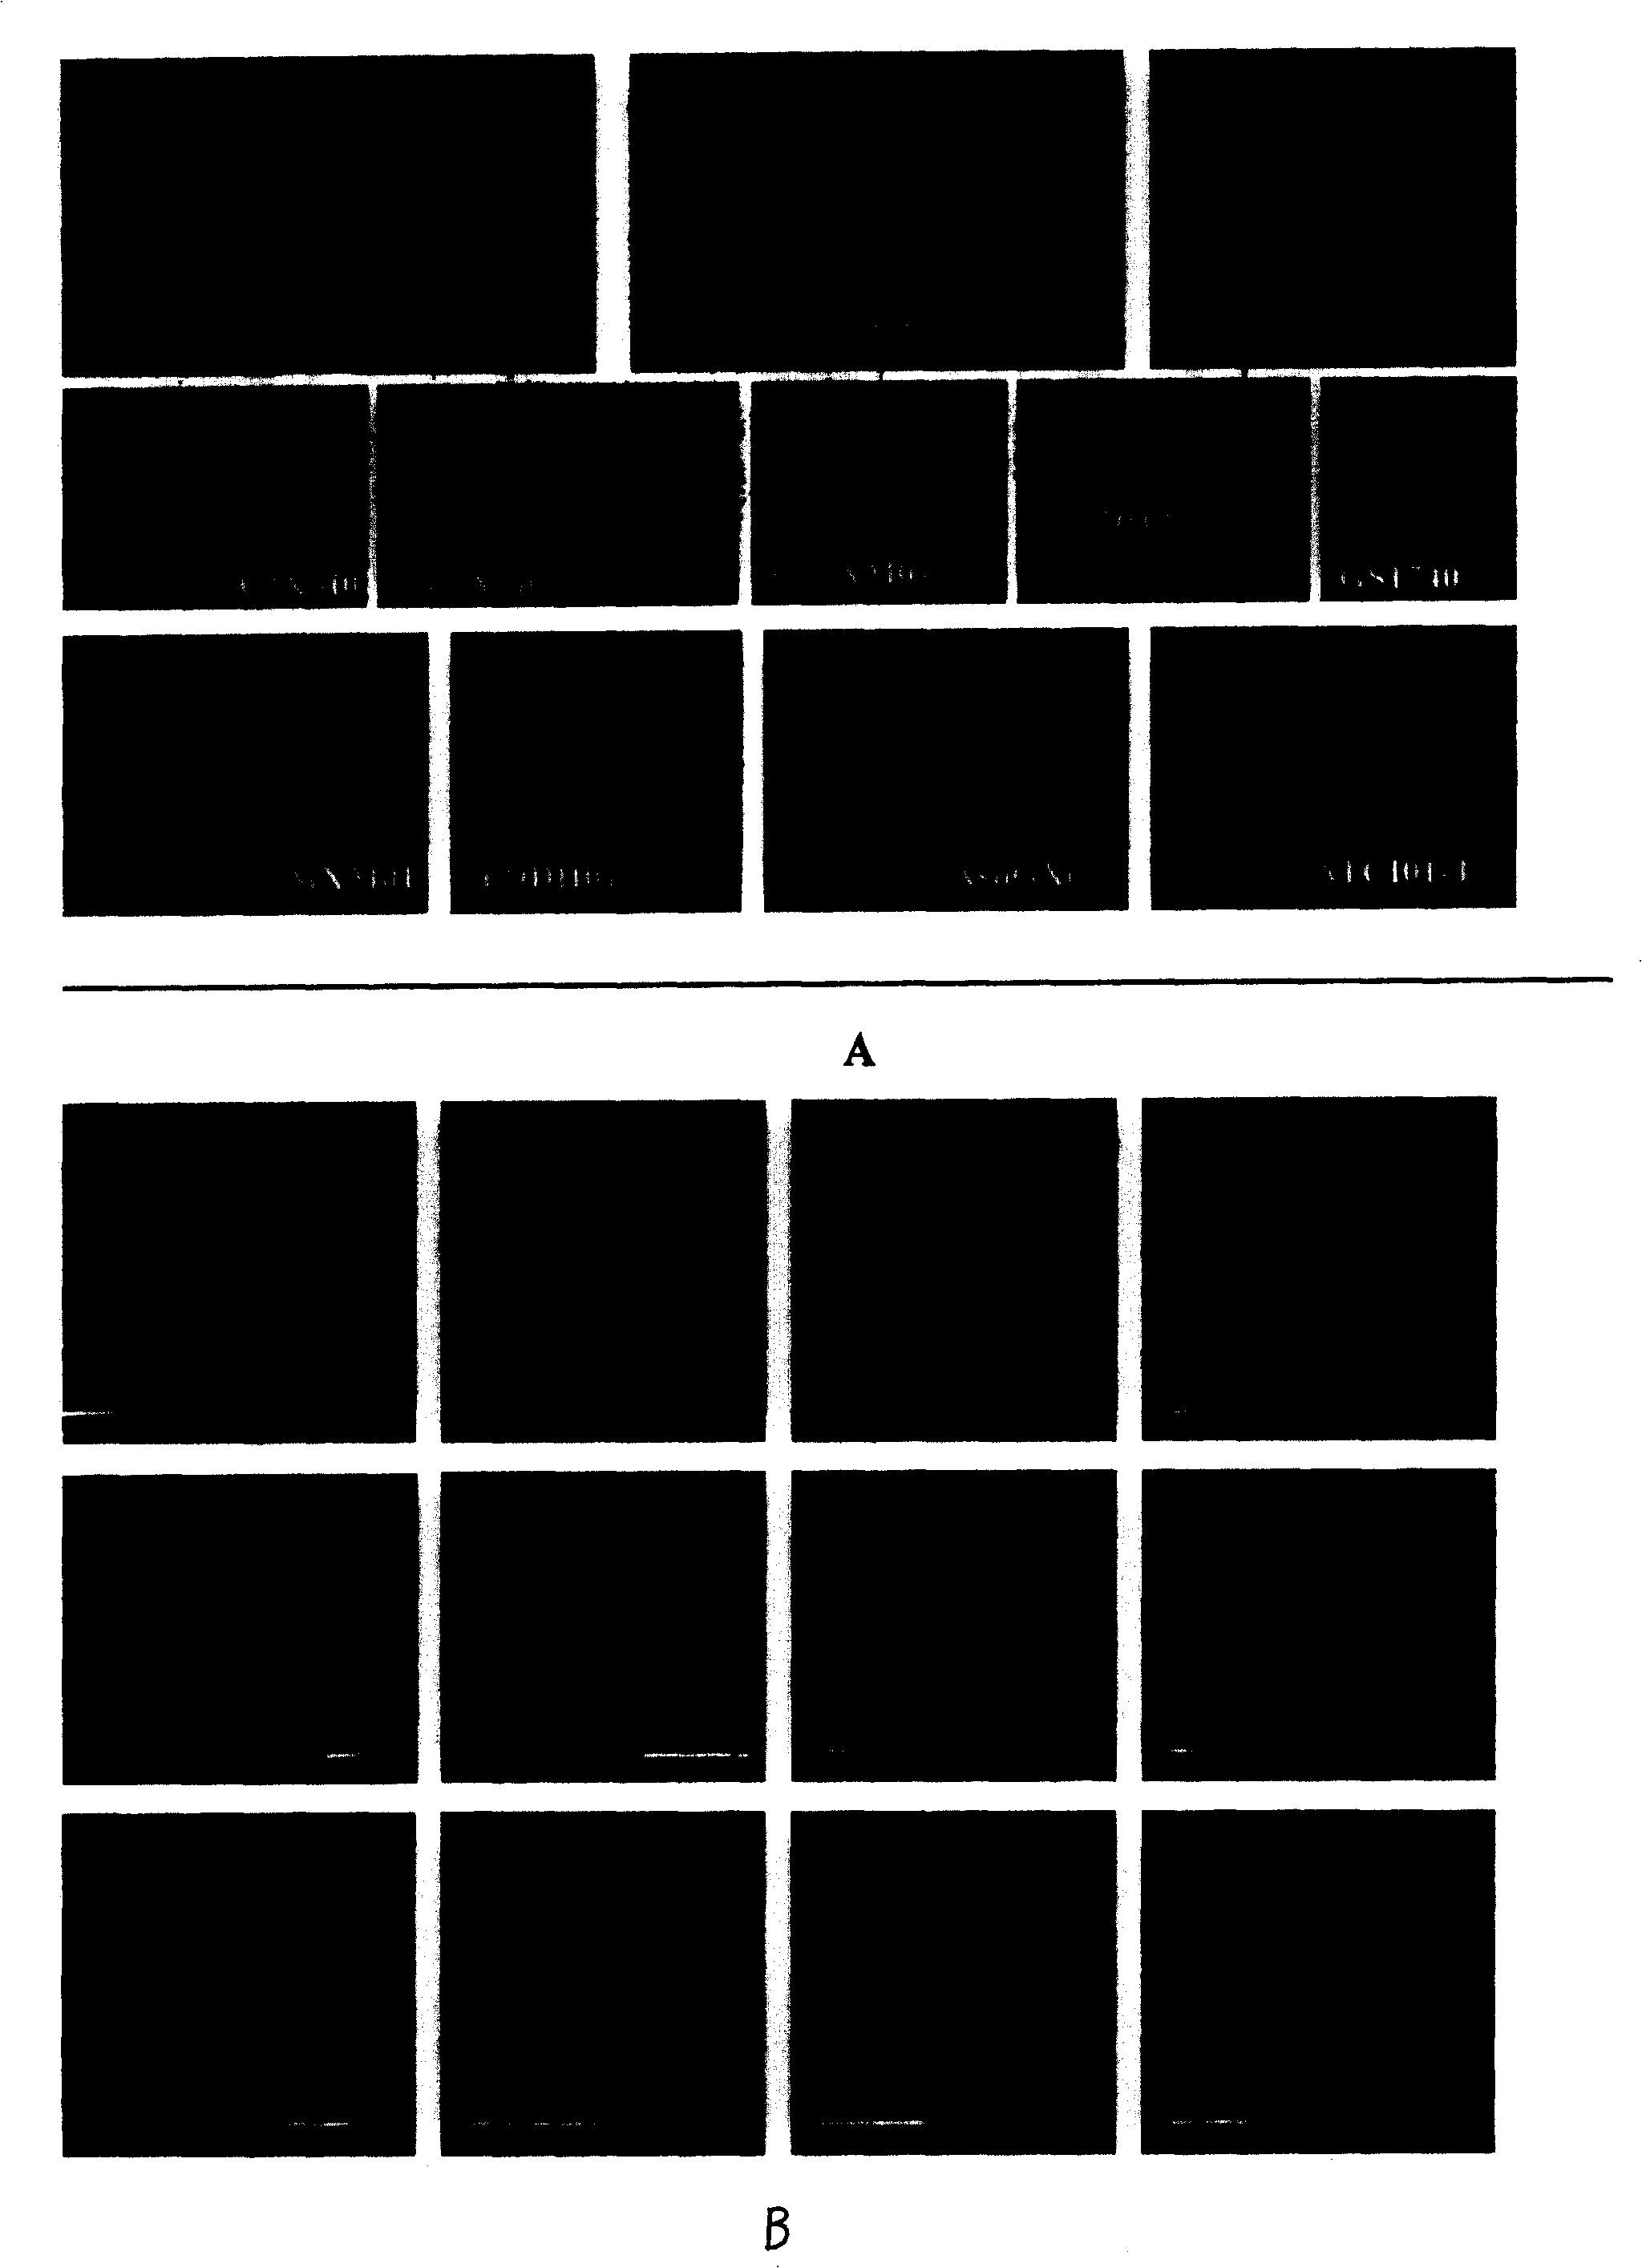 Fluorescence labeled cell agglutinin probe red tide biological detection reagent kit and detecting method thereof